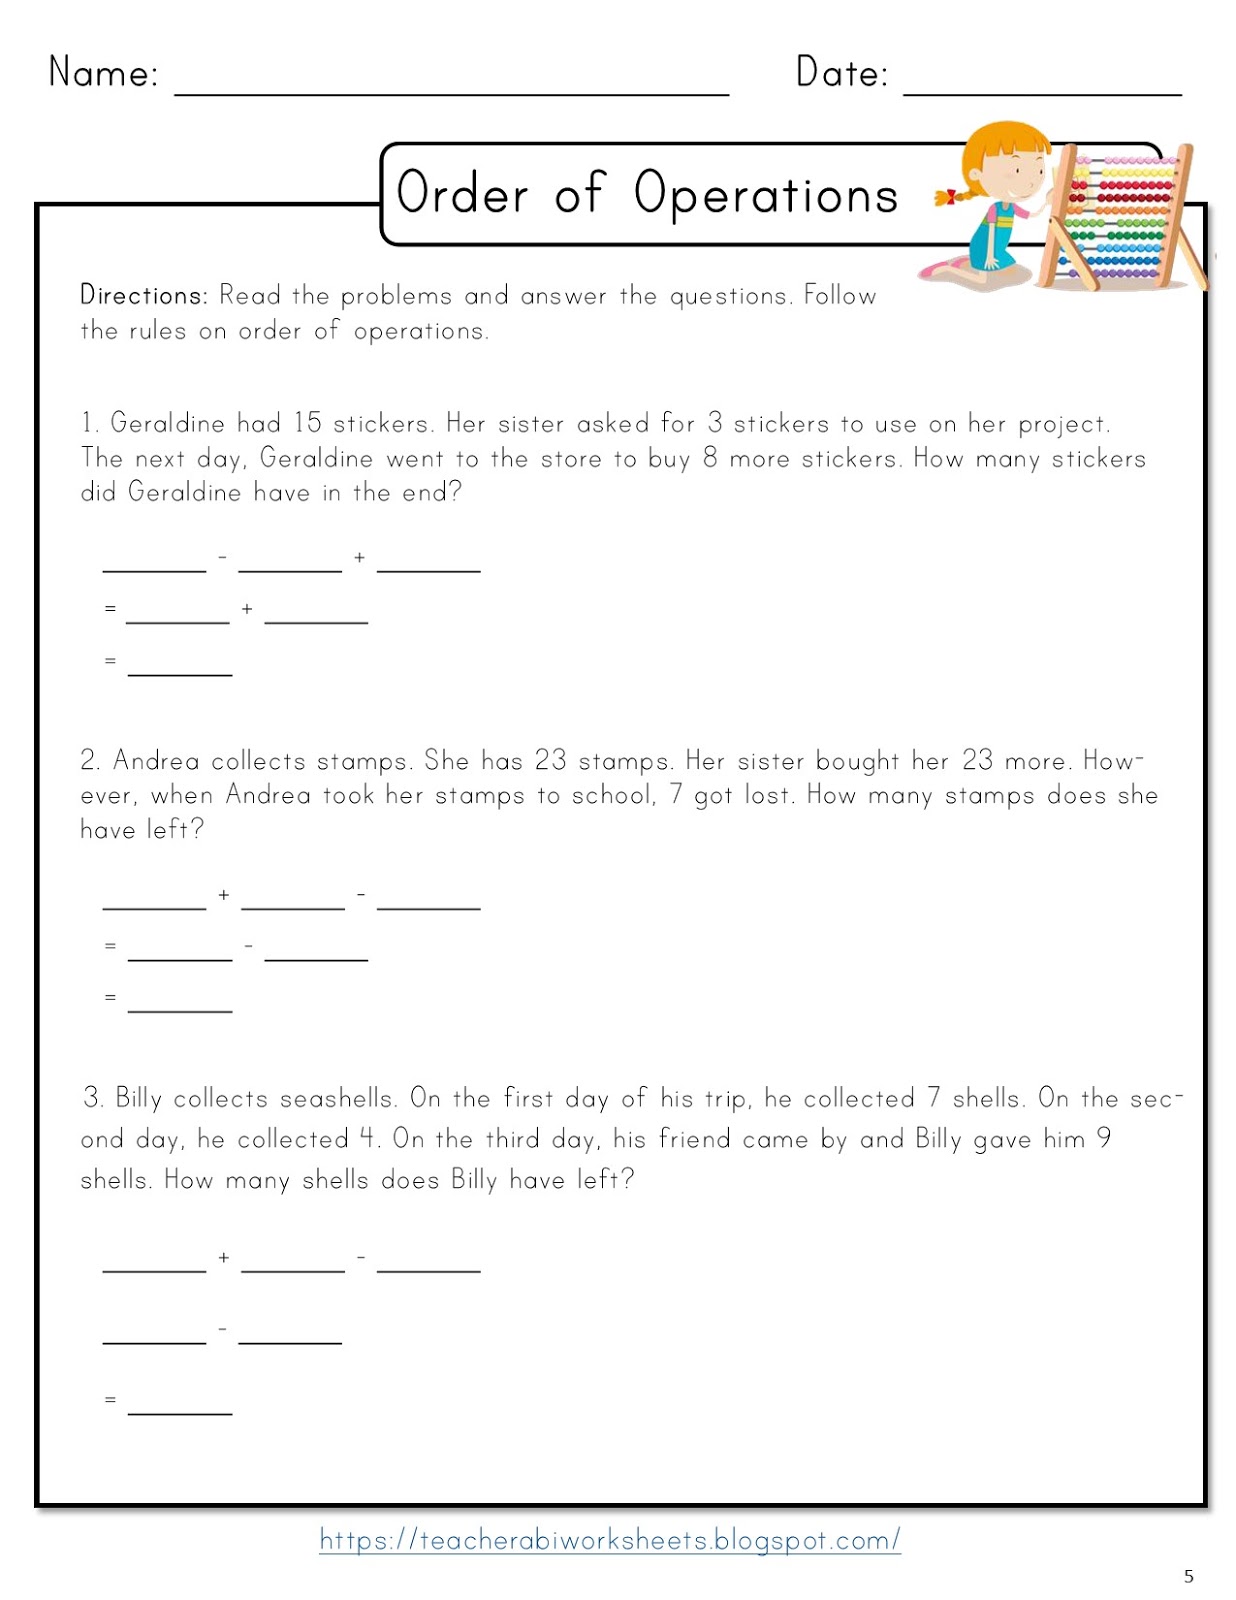 problem solving in order of operations